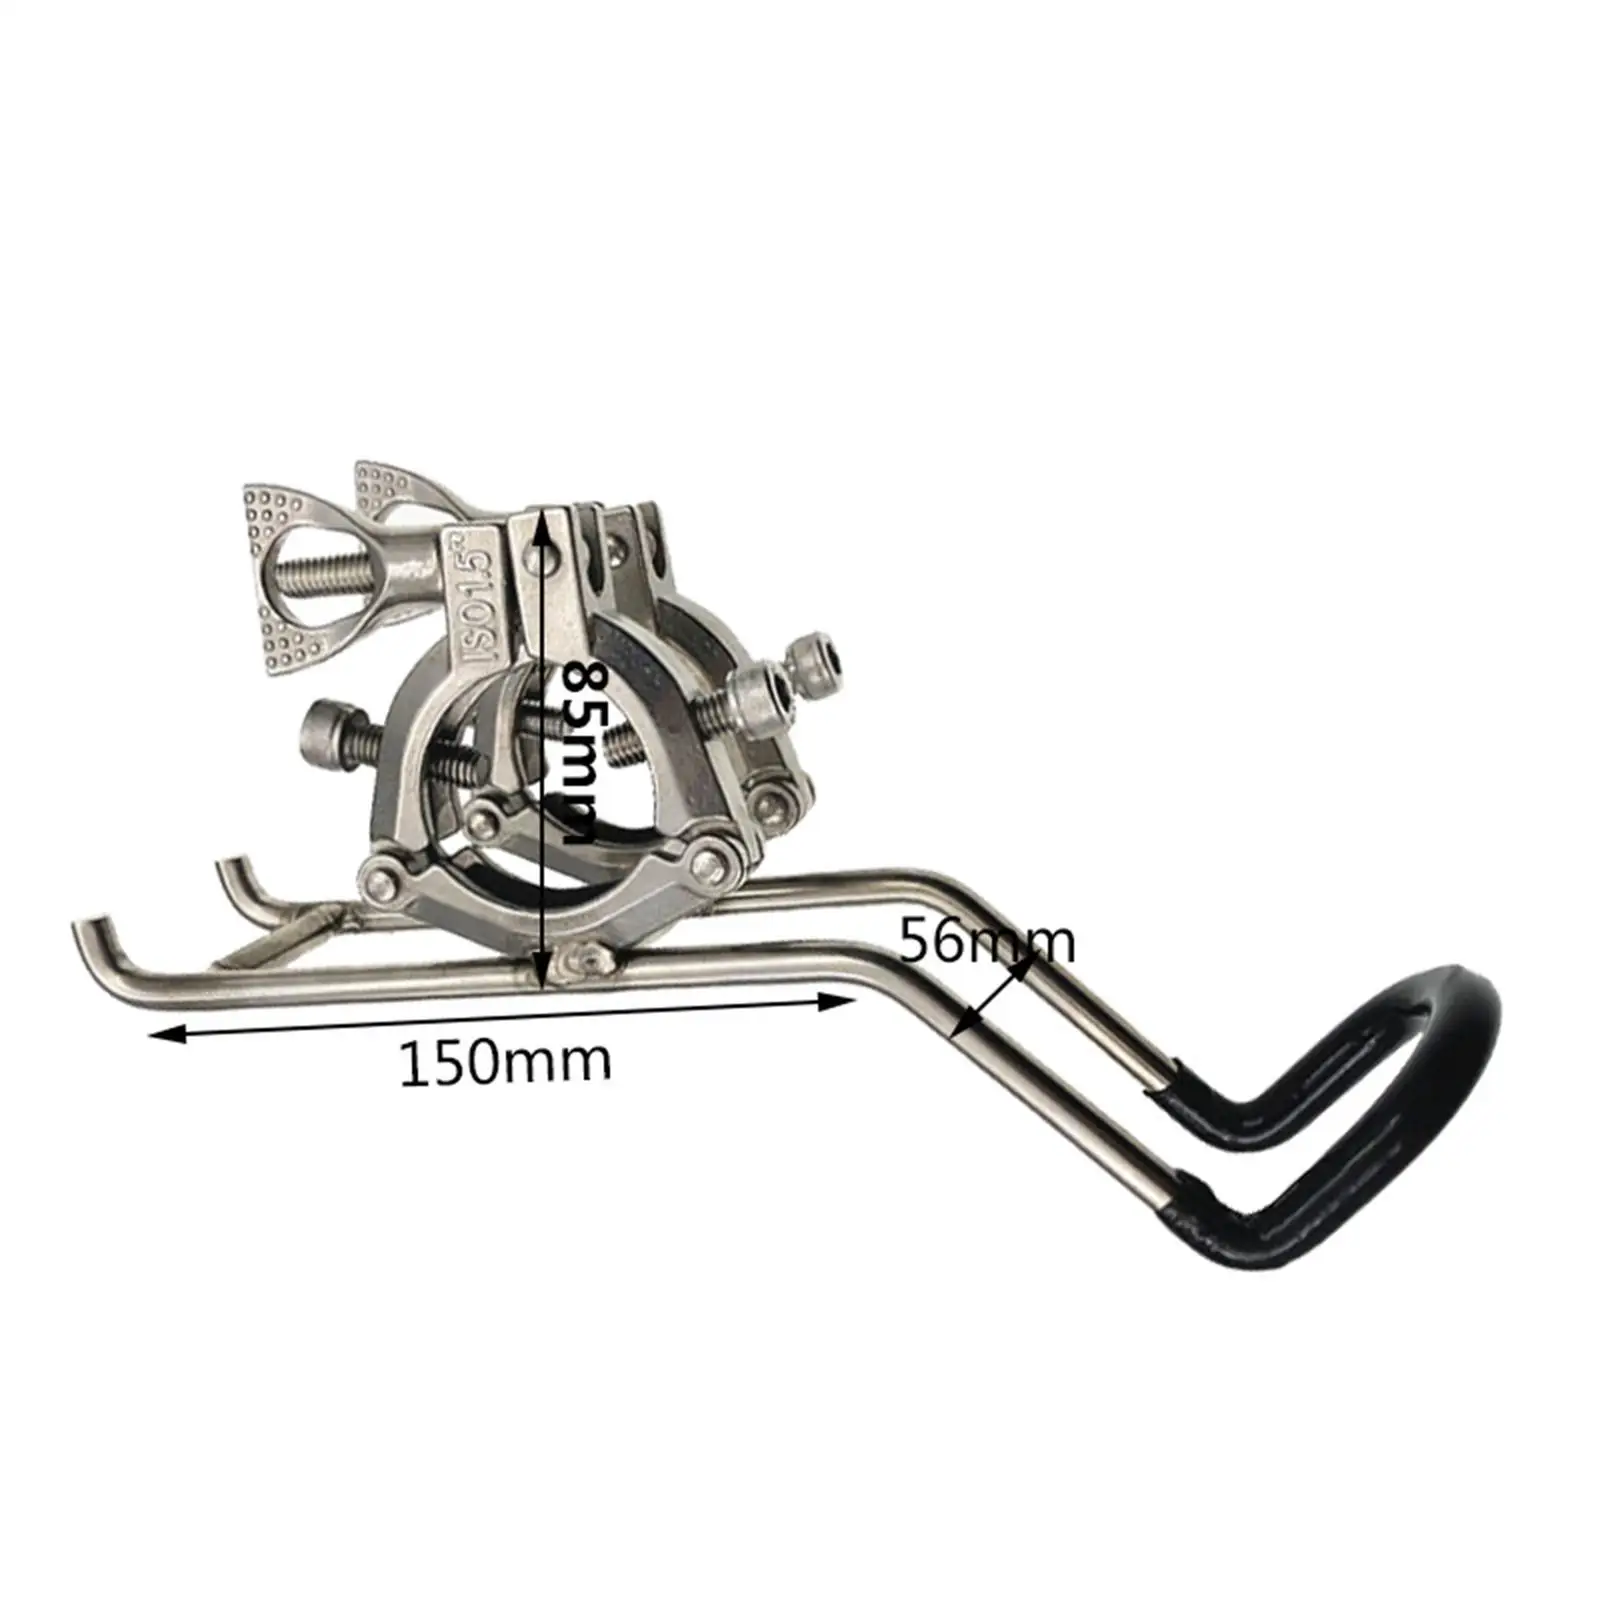 Boat Fishing Rod Holder Clamp Double Wire Durable Spare Parts Accessories Anti-Rust Bracket Fit for Kayak